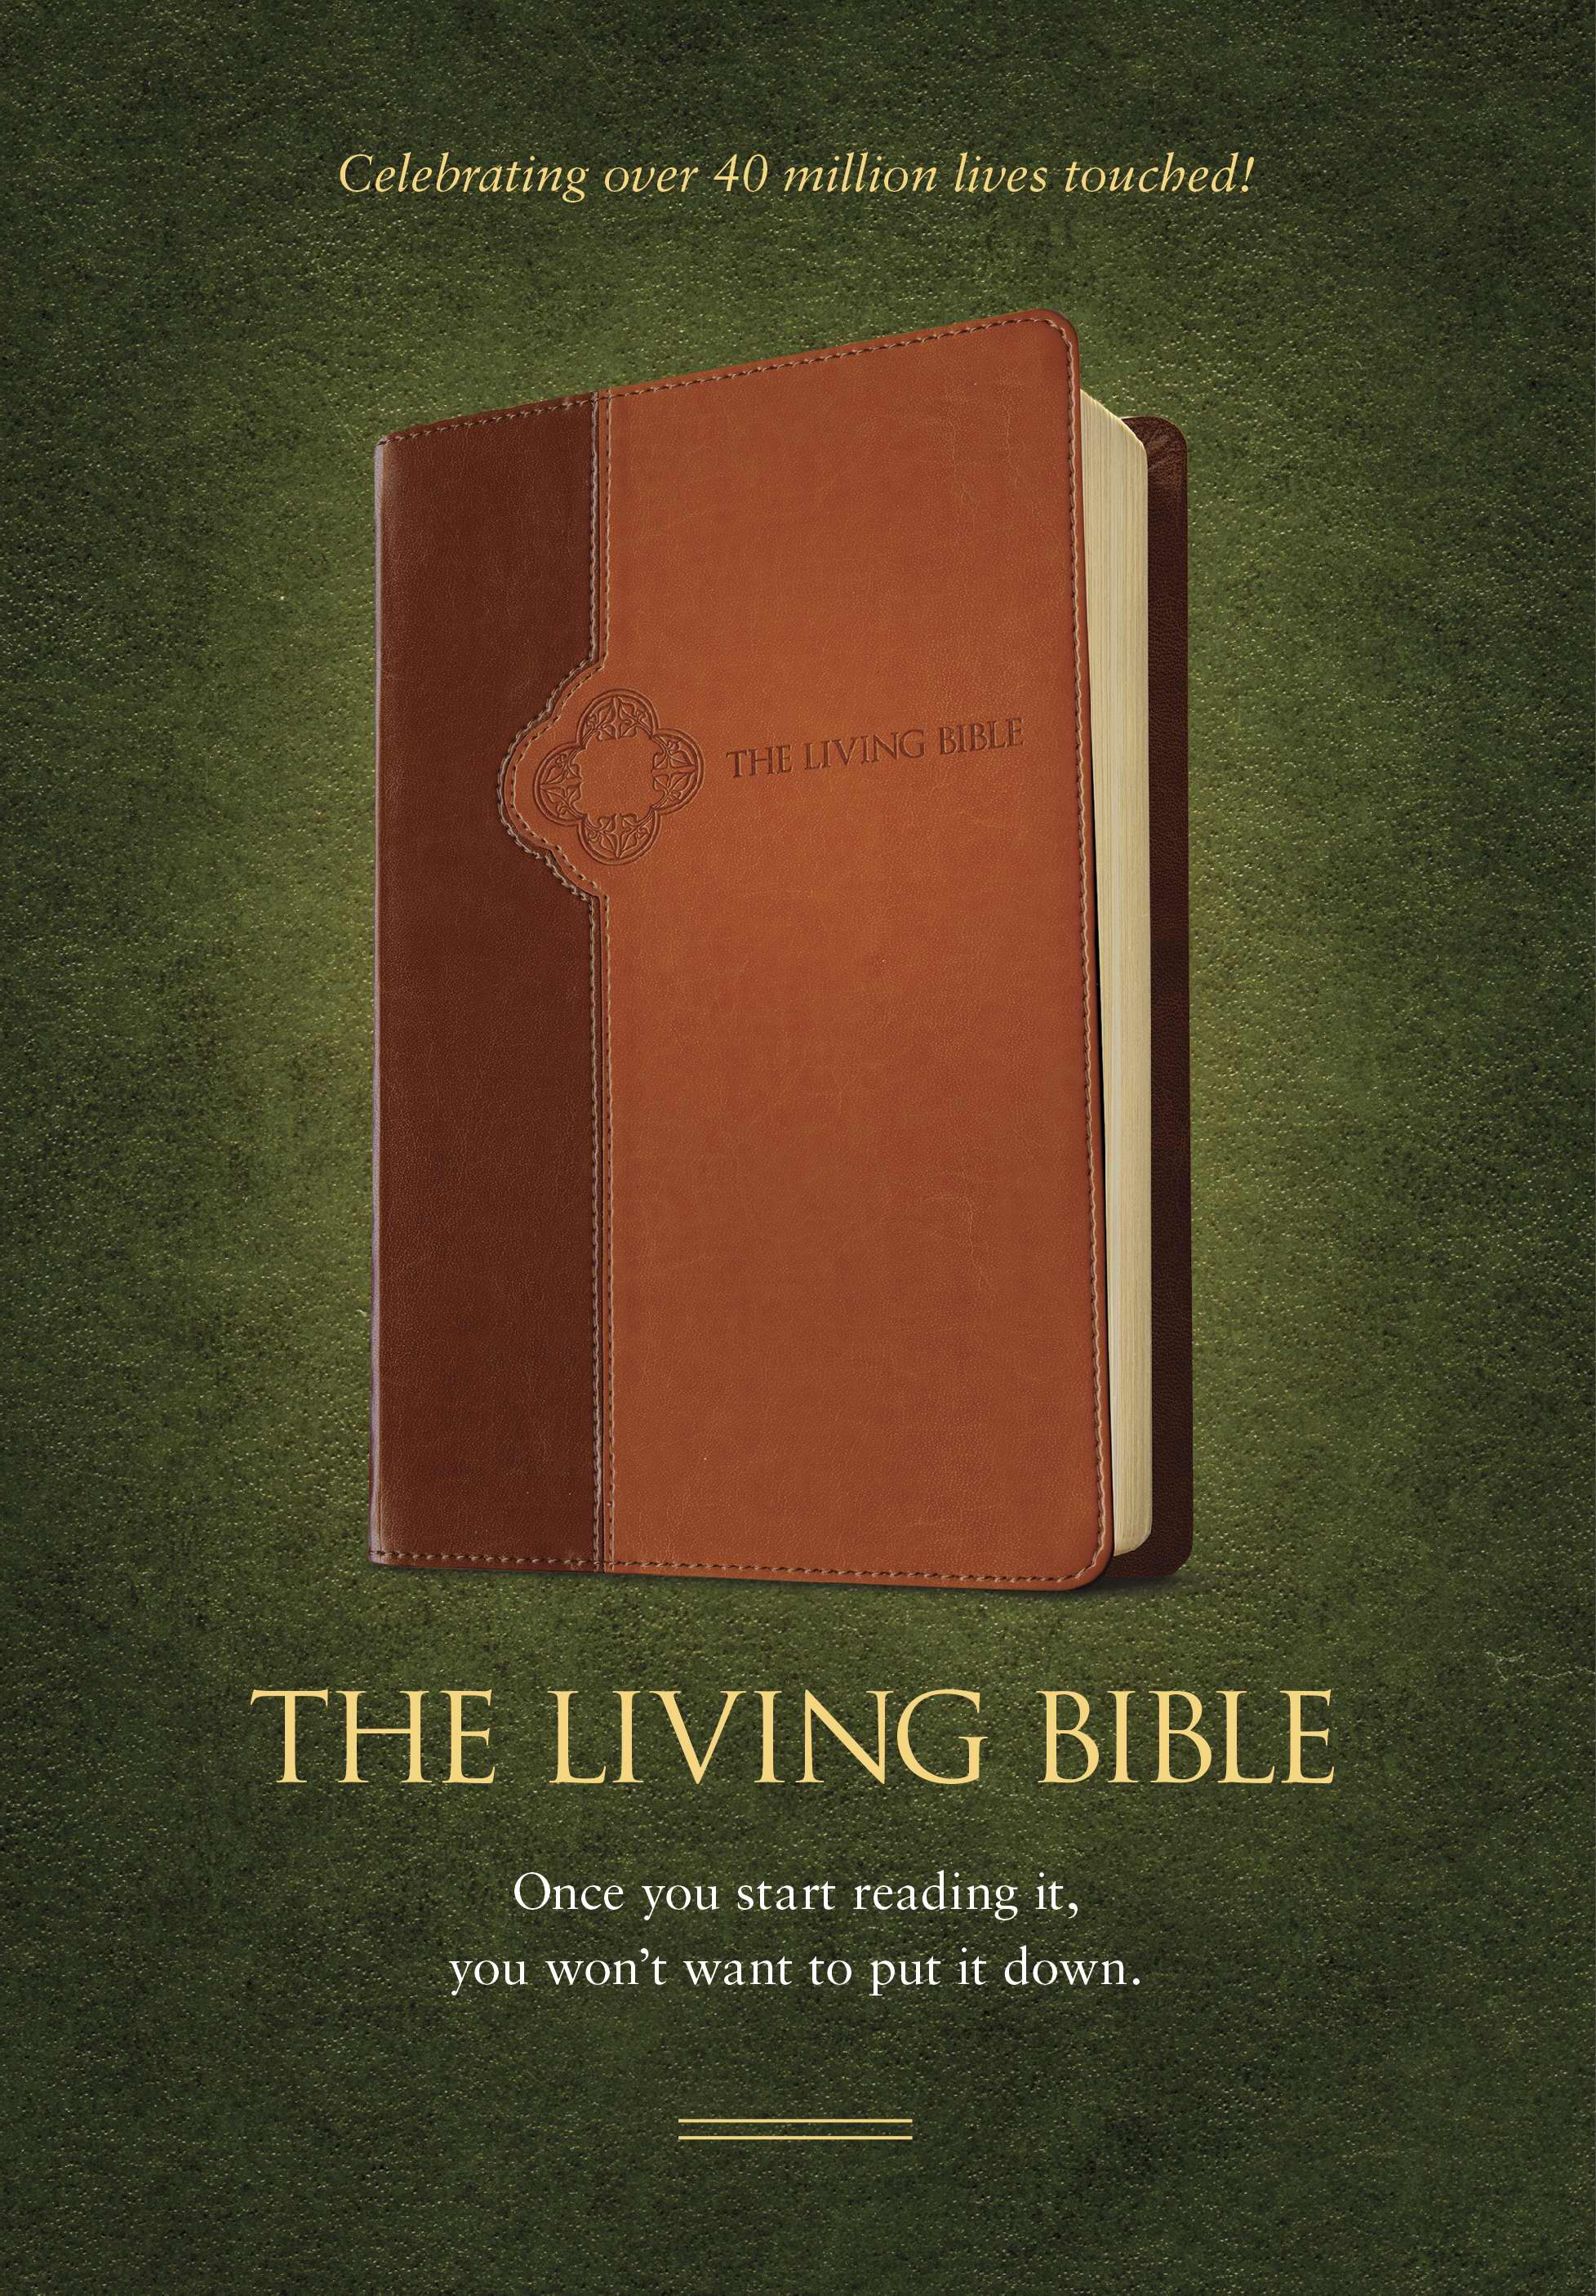 Image of The Living Bible Paraphrase Bible, Brown, Imitation Leather, Concordance, Colour Maps, Bible Reading Plan, Gilt Edged, Ribbon Marker other